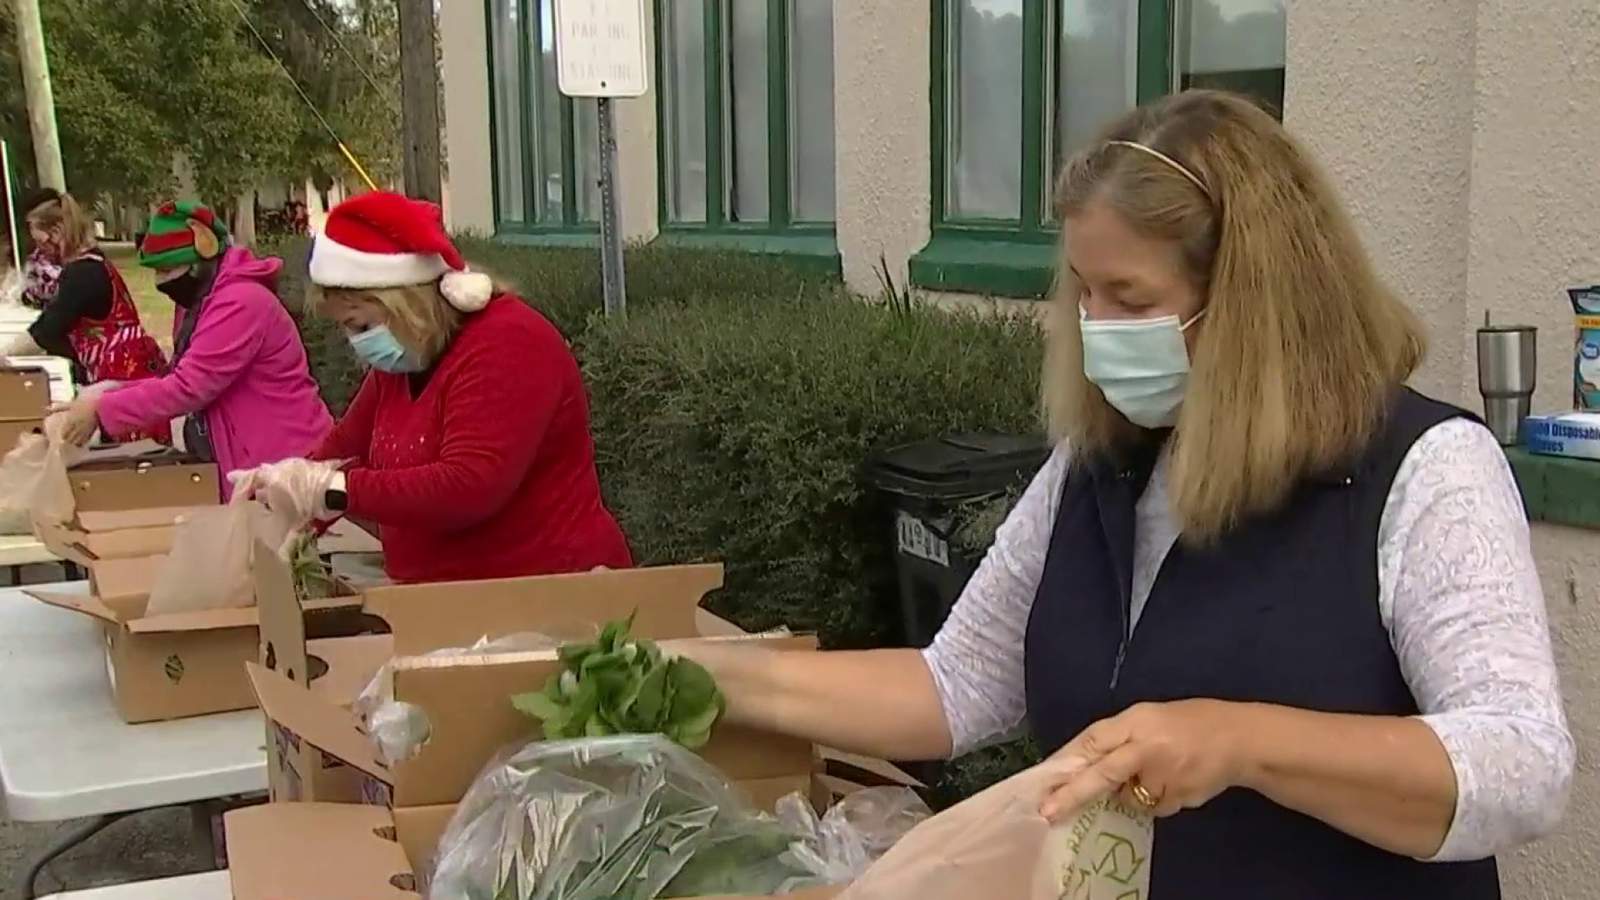 Pop-up food bank serves Chuluota area with fresh vegetables